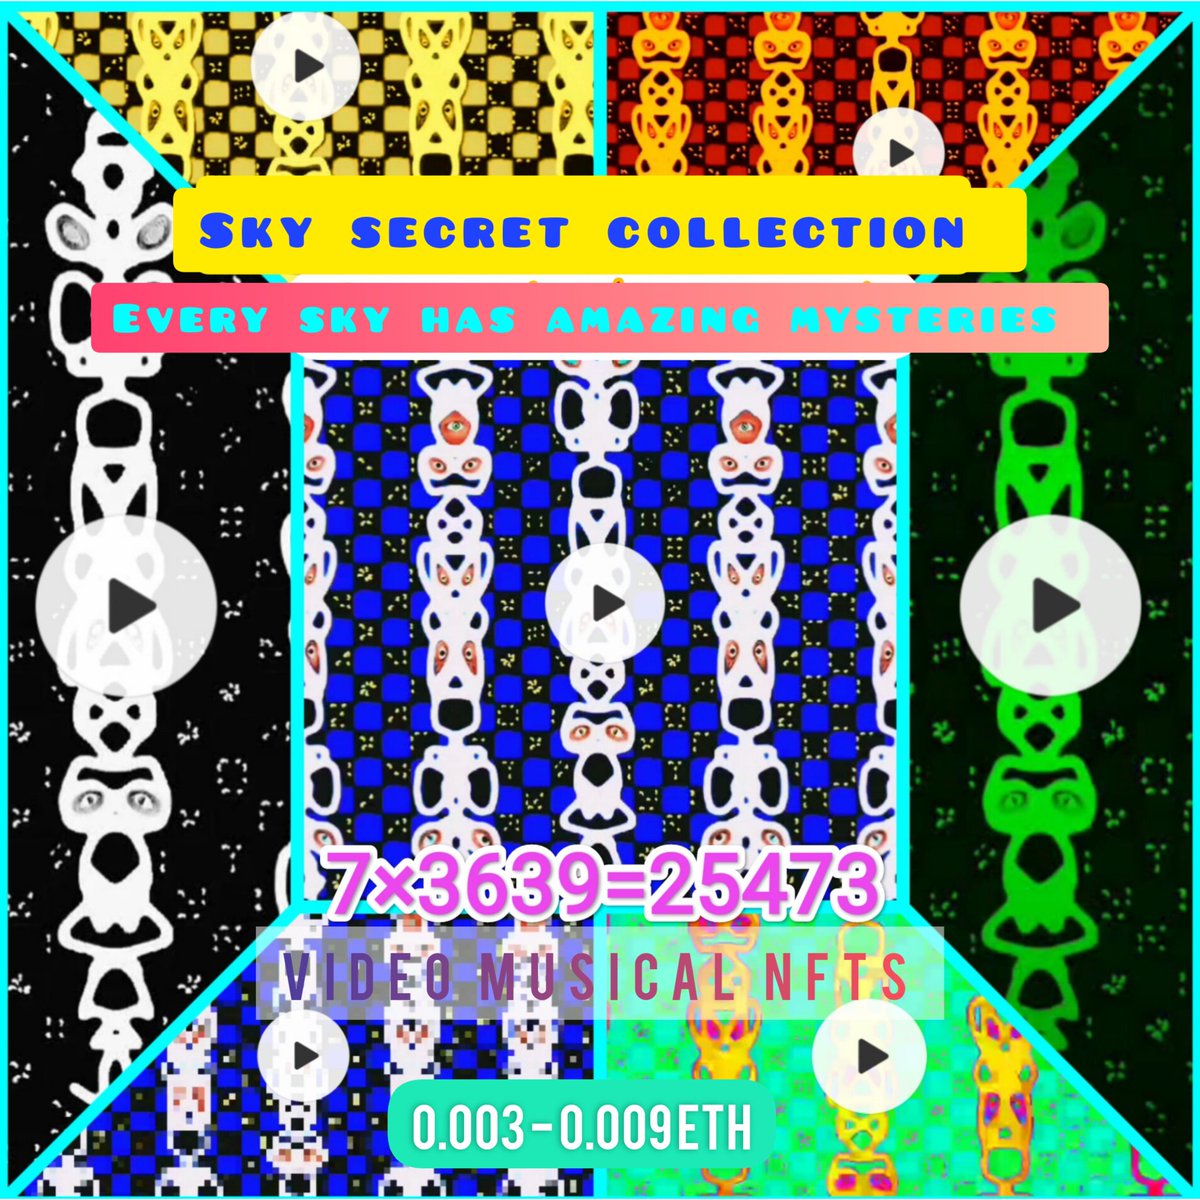 An amazing collection
🔑 Sky secret collection 🔑
Every sky has mysteries that will show after buying in Unlockable Content section 
#nft 
#NFTs 
#MYSTERY 
#investing 
#sky 
#NFTsales
#nftgame 
opensea.io/collection/sky…